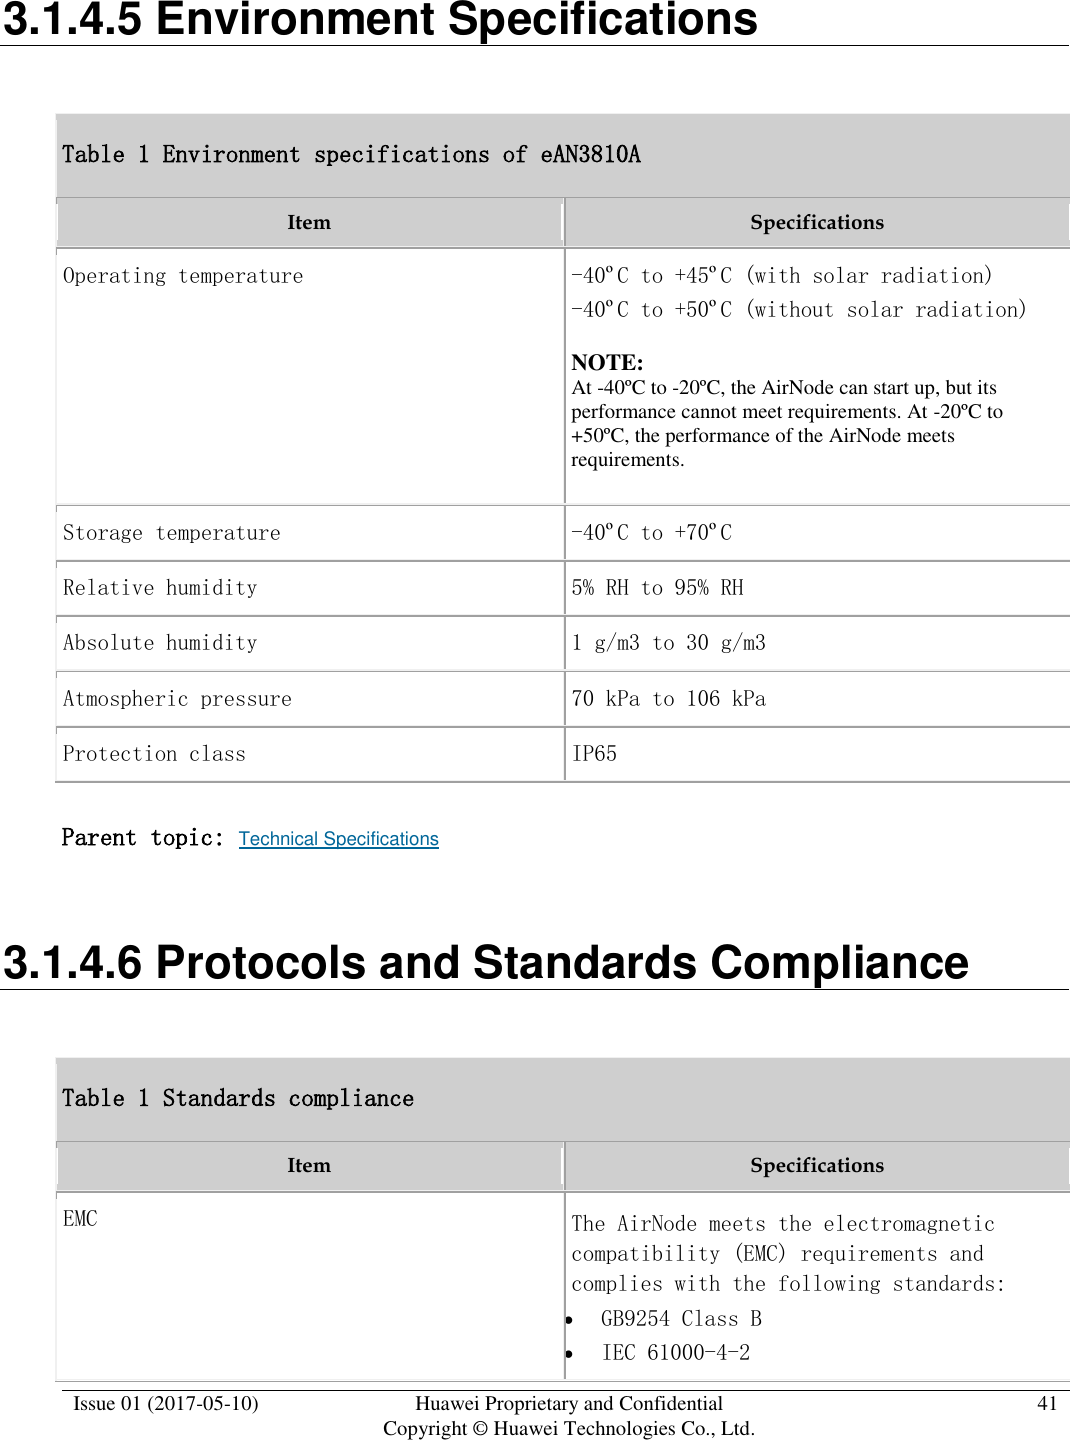  Issue 01 (2017-05-10) Huawei Proprietary and Confidential      Copyright © Huawei Technologies Co., Ltd. 41  3.1.4.5 Environment Specifications Table 1 Environment specifications of eAN3810A Item Specifications Operating temperature -40ºC to +45ºC (with solar radiation) -40ºC to +50ºC (without solar radiation) NOTE:  At -40ºC to -20ºC, the AirNode can start up, but its performance cannot meet requirements. At -20ºC to +50ºC, the performance of the AirNode meets requirements. Storage temperature -40ºC to +70ºC Relative humidity 5% RH to 95% RH Absolute humidity 1 g/m3 to 30 g/m3 Atmospheric pressure 70 kPa to 106 kPa Protection class IP65 Parent topic: Technical Specifications 3.1.4.6 Protocols and Standards Compliance Table 1 Standards compliance Item Specifications EMC The AirNode meets the electromagnetic compatibility (EMC) requirements and complies with the following standards:  GB9254 Class B  IEC 61000-4-2 